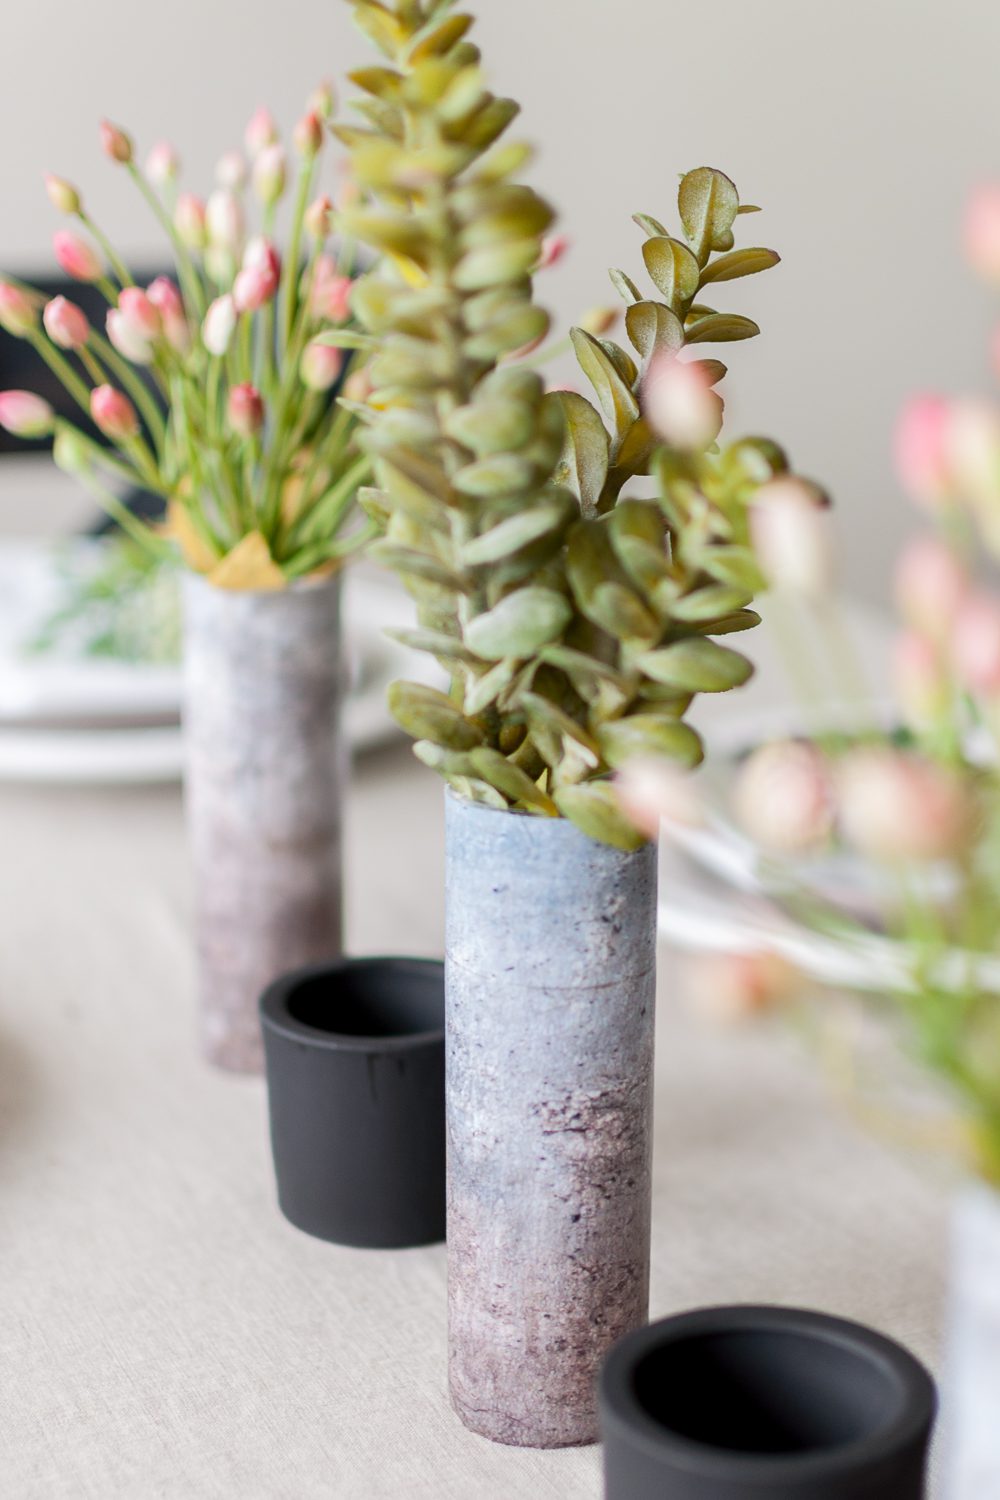 Use a little Dishwasher Safe Mod Podge to completely transform these small glass vases into a Faux Concrete Vase! This is such an easy and affordable project, visit Cherished Bliss for the how-to!